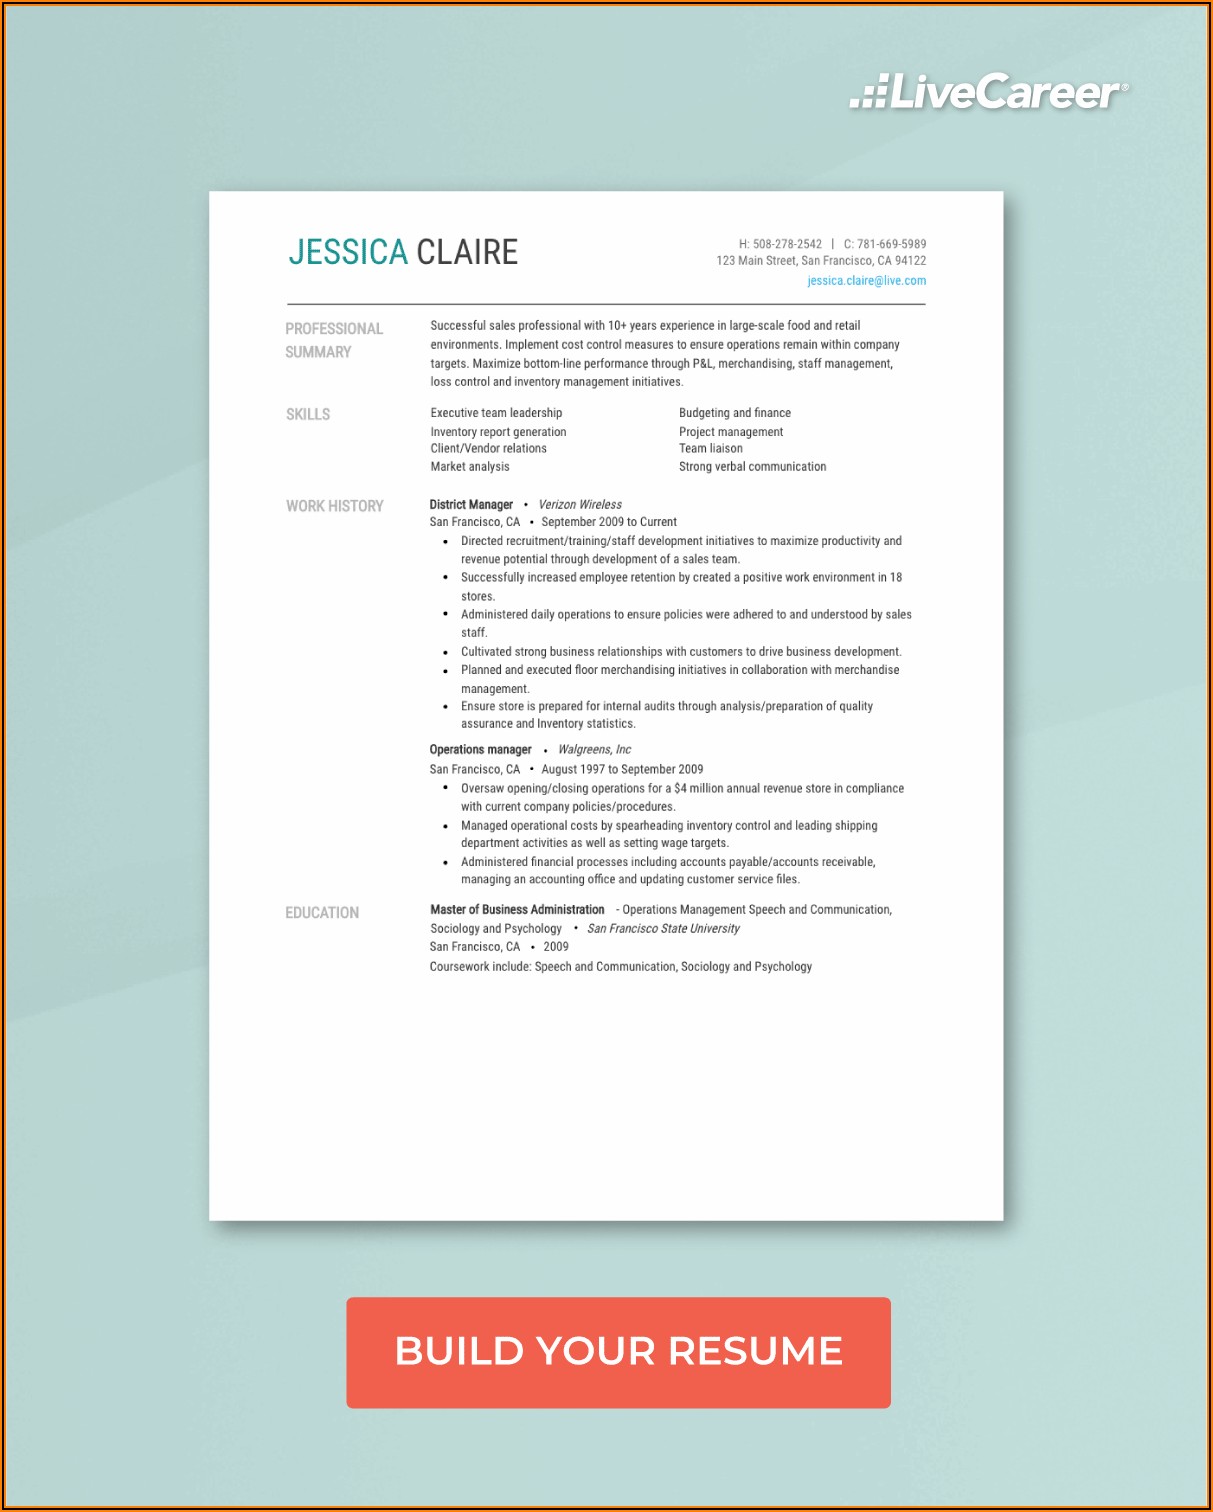 A Free Resume Builder